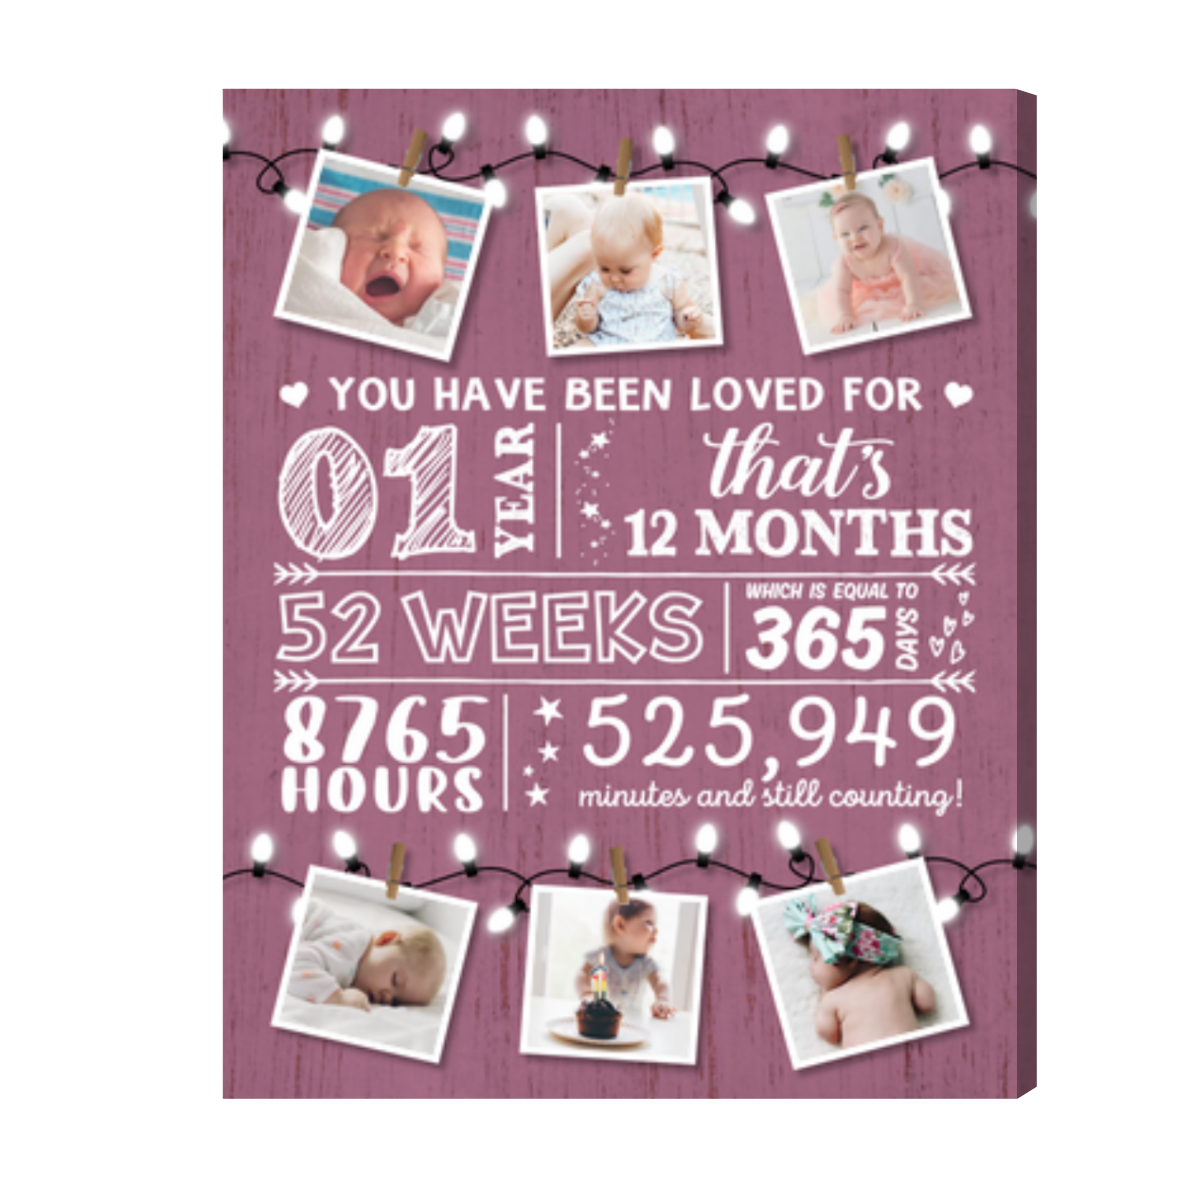 you-have-been-loved-for-1-year-personalized-photo-canvas-birthday-gift